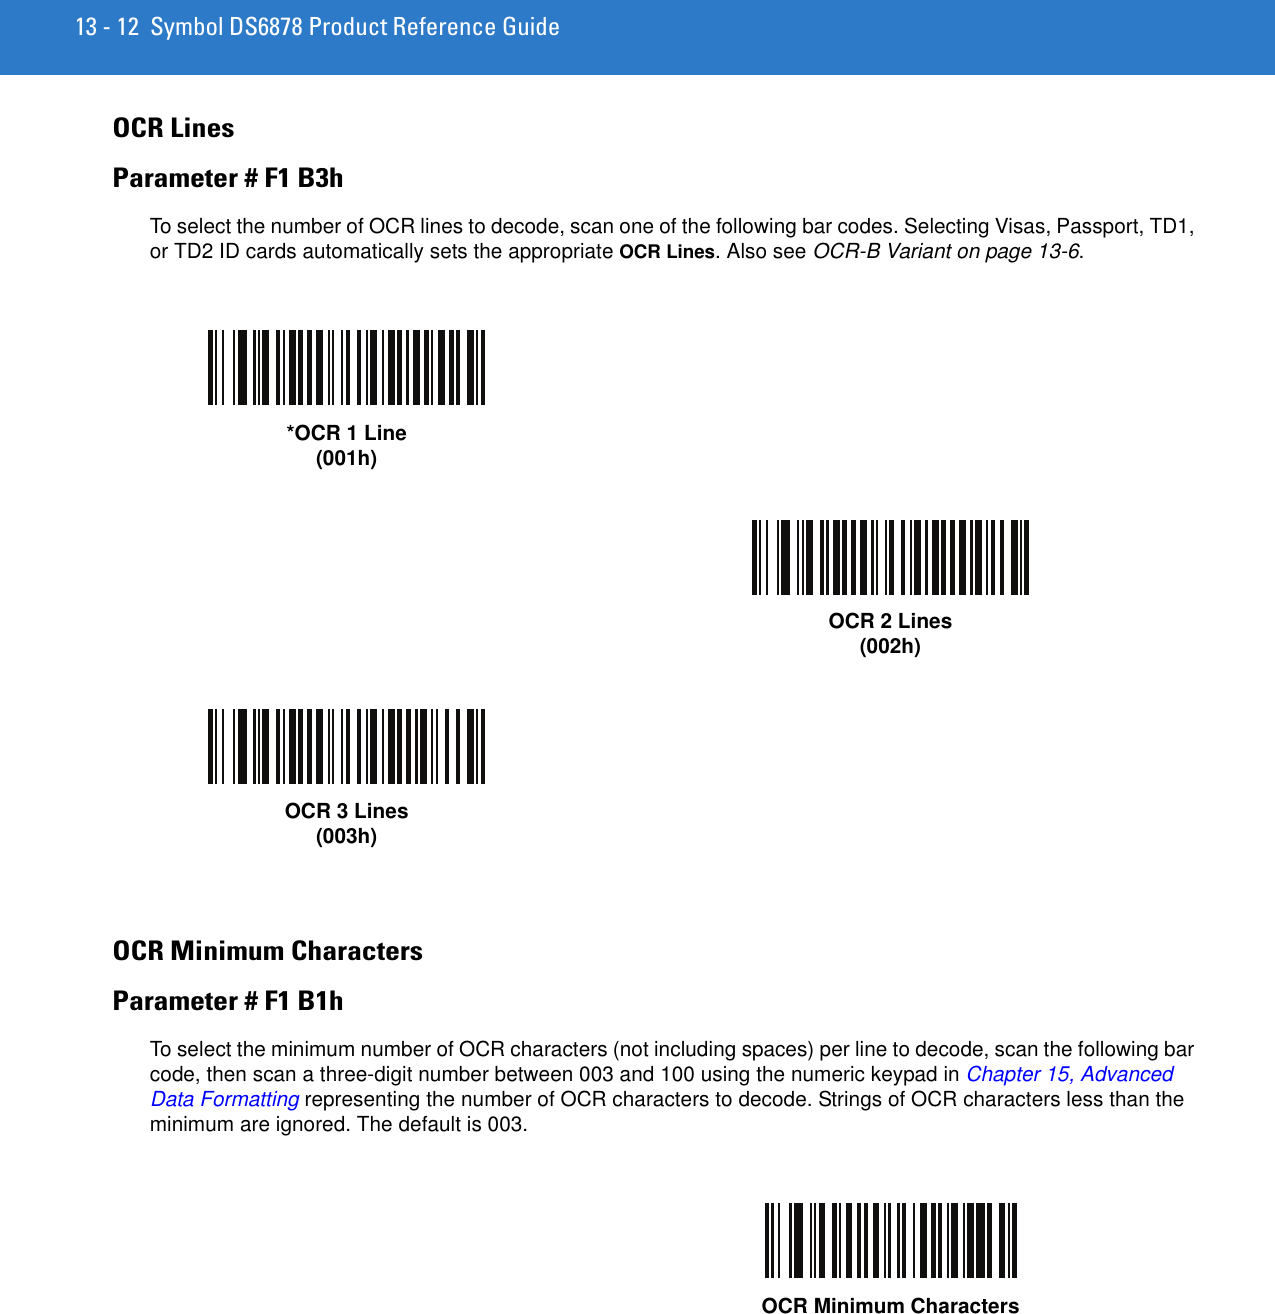 13 - 12 Symbol DS6878 Product Reference GuideOCR LinesParameter # F1 B3hTo select the number of OCR lines to decode, scan one of the following bar codes. Selecting Visas, Passport, TD1, or TD2 ID cards automatically sets the appropriate OCR Lines. Also see OCR-B Variant on page 13-6.OCR Minimum CharactersParameter # F1 B1hTo select the minimum number of OCR characters (not including spaces) per line to decode, scan the following bar code, then scan a three-digit number between 003 and 100 using the numeric keypad in Chapter 15, Advanced Data Formatting representing the number of OCR characters to decode. Strings of OCR characters less than the minimum are ignored. The default is 003.*OCR 1 Line(001h)OCR 2 Lines(002h)OCR 3 Lines(003h)OCR Minimum Characters